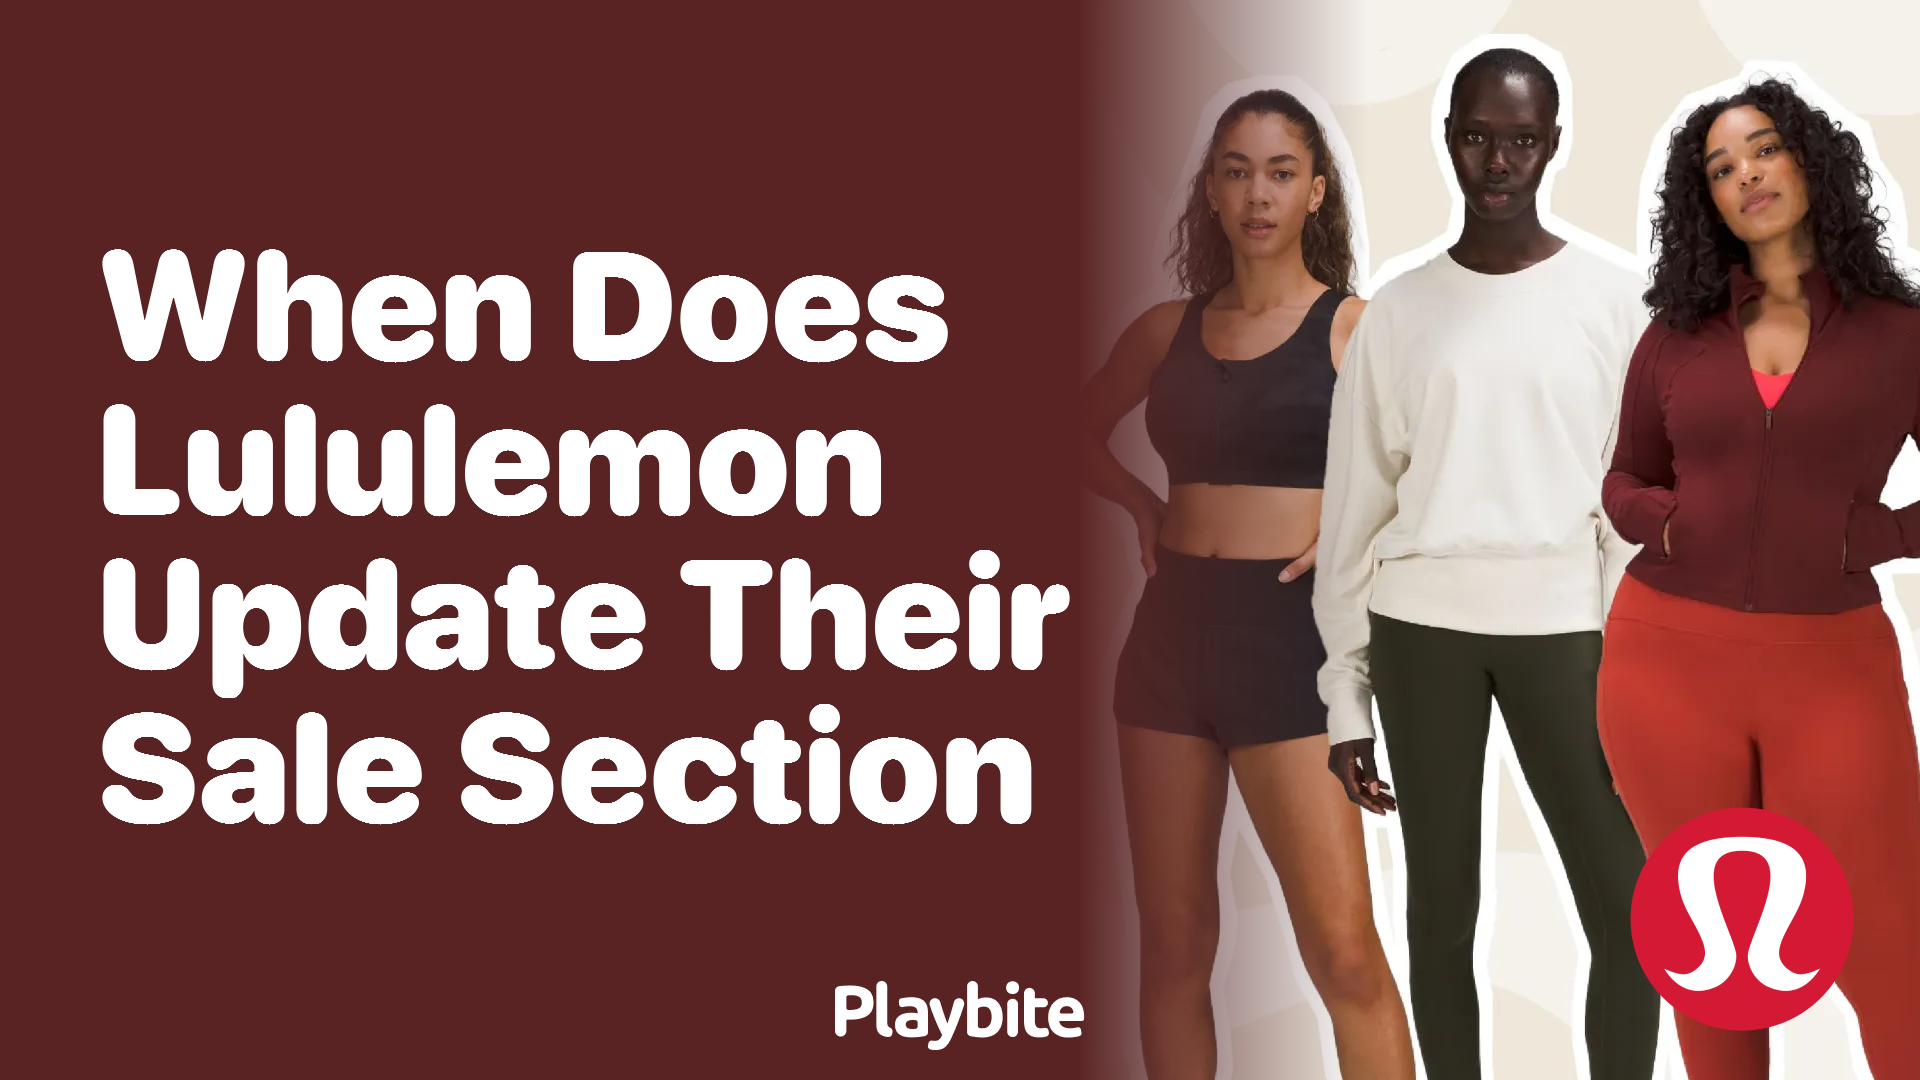 When Does Lululemon Update Their Sale Section? Find Out Now! - Playbite